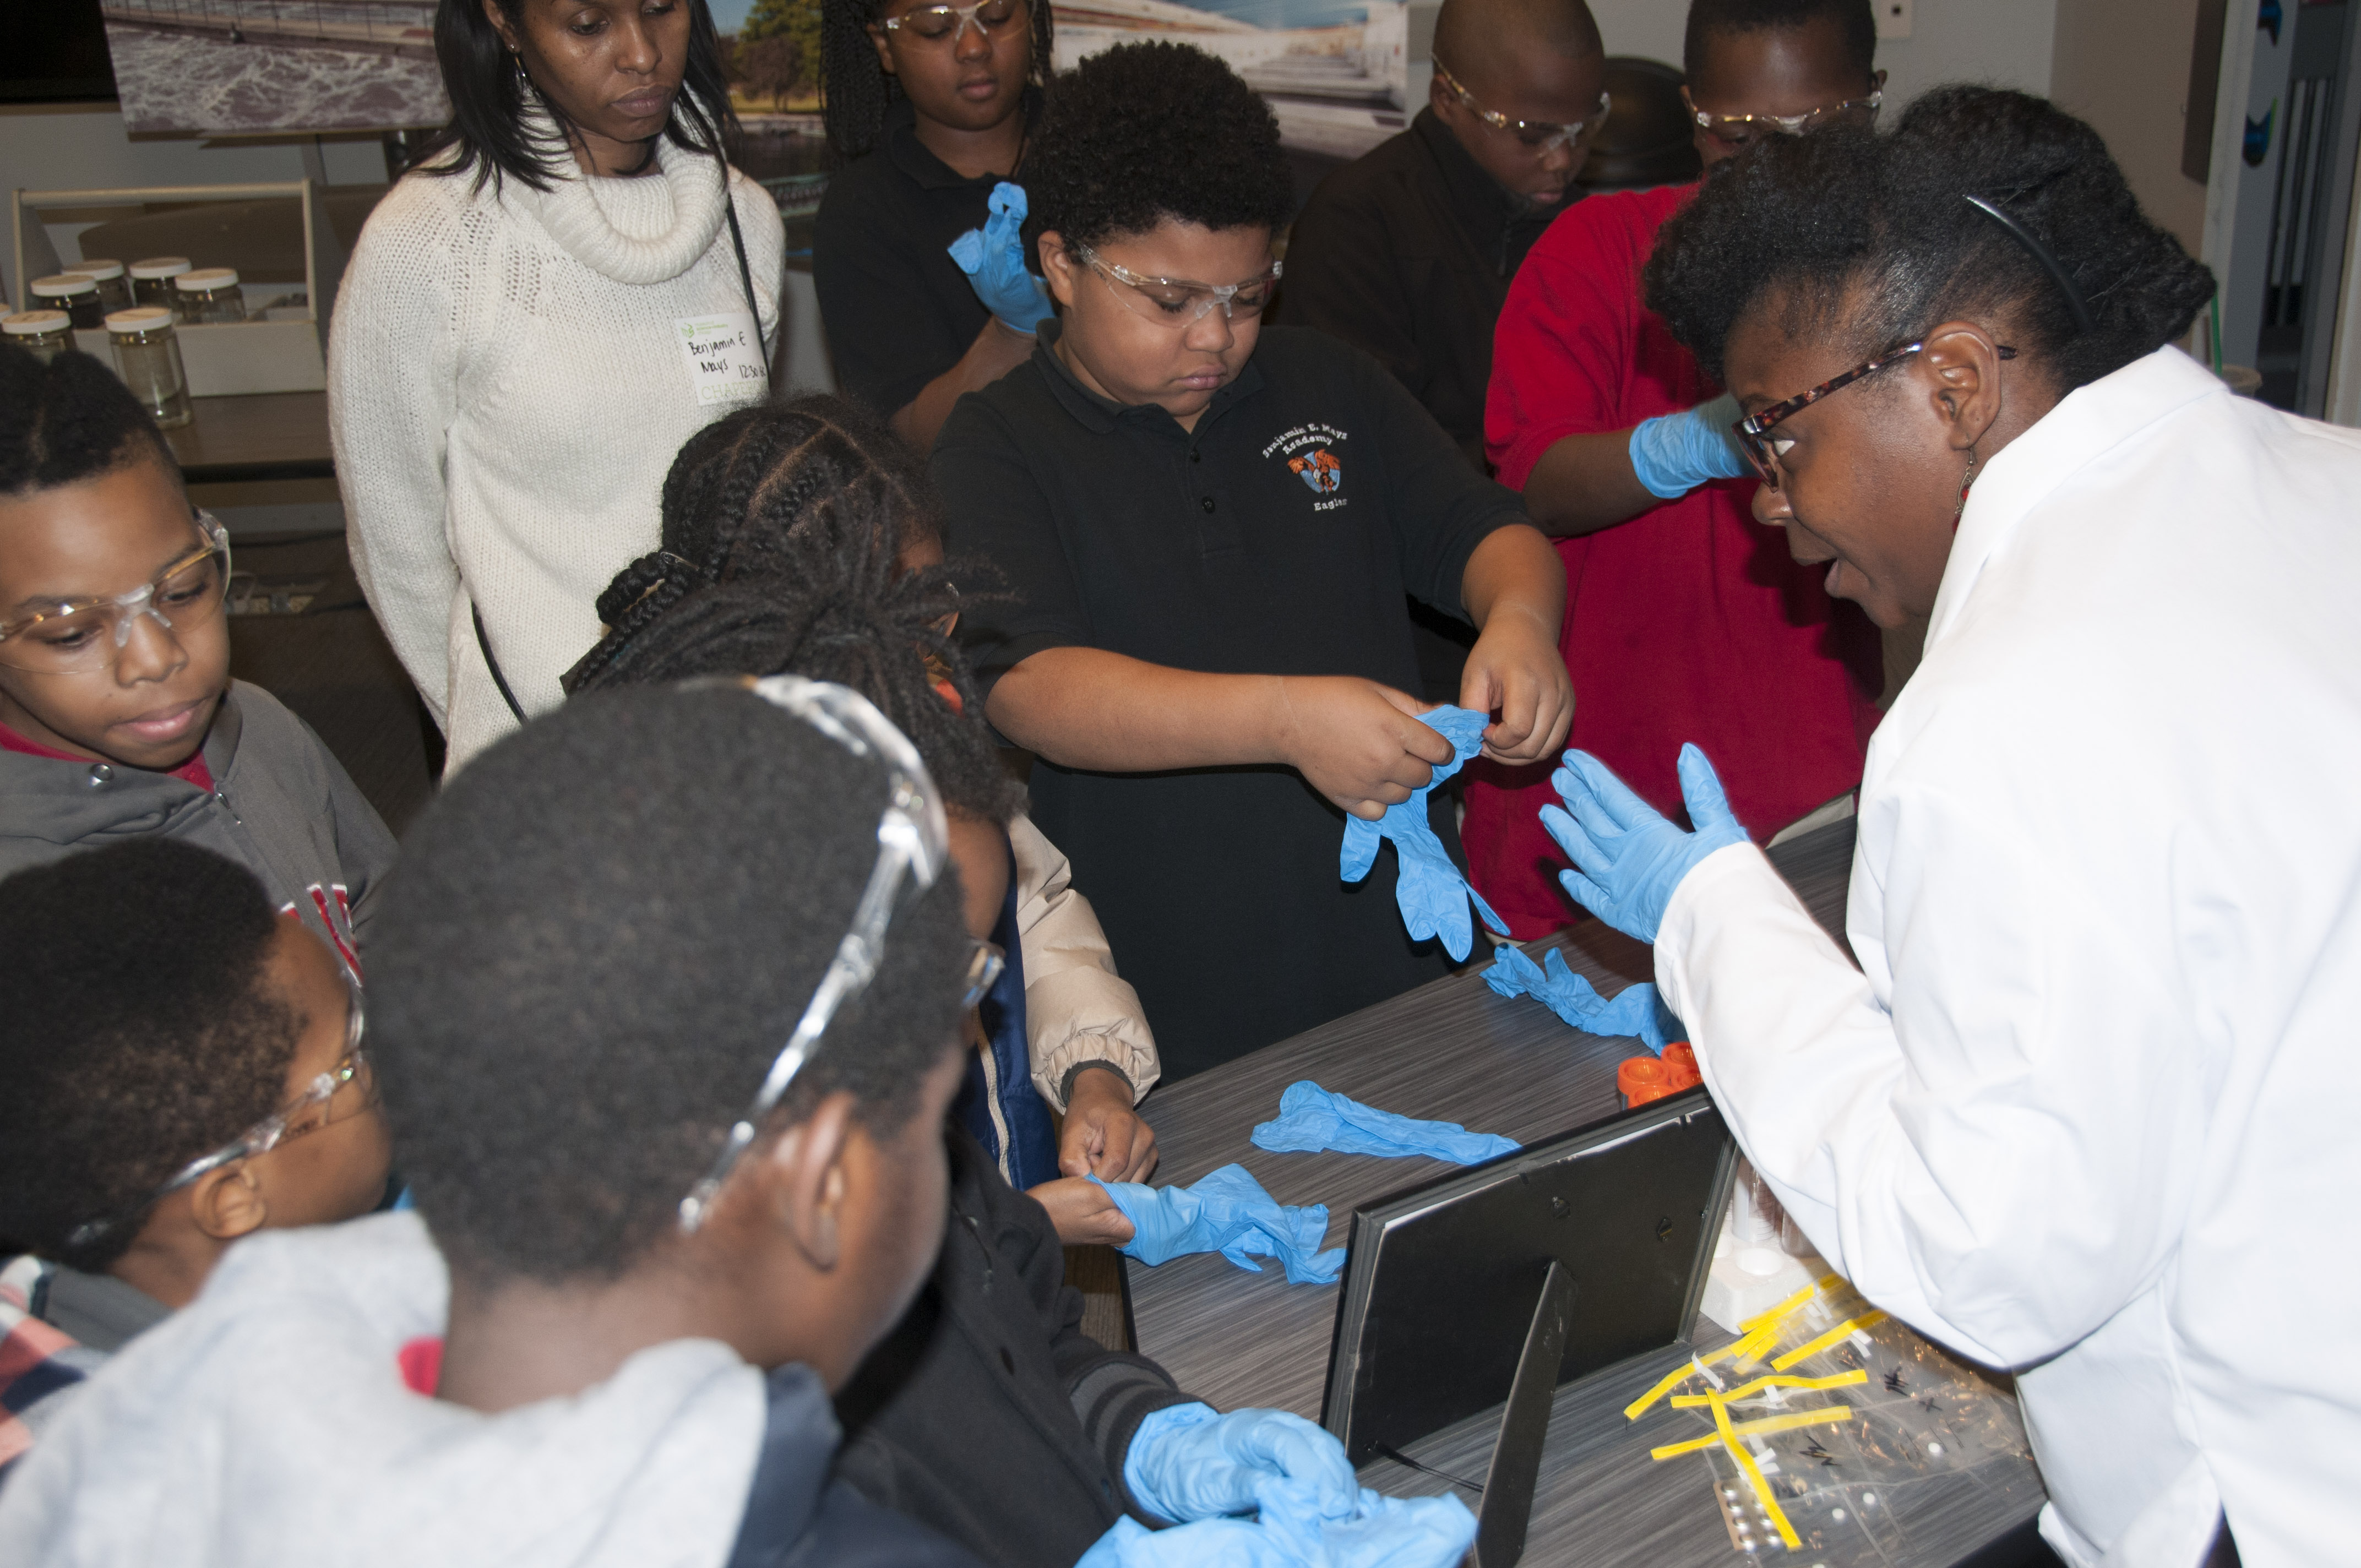 Tiffany Poole, Assistant Environmental Chemist, leads students through a hands-on practicum to test water samples for pH, dissolved oxygen, ammonia and nitrate levels in 2016 at the Museum of Science and Industry.